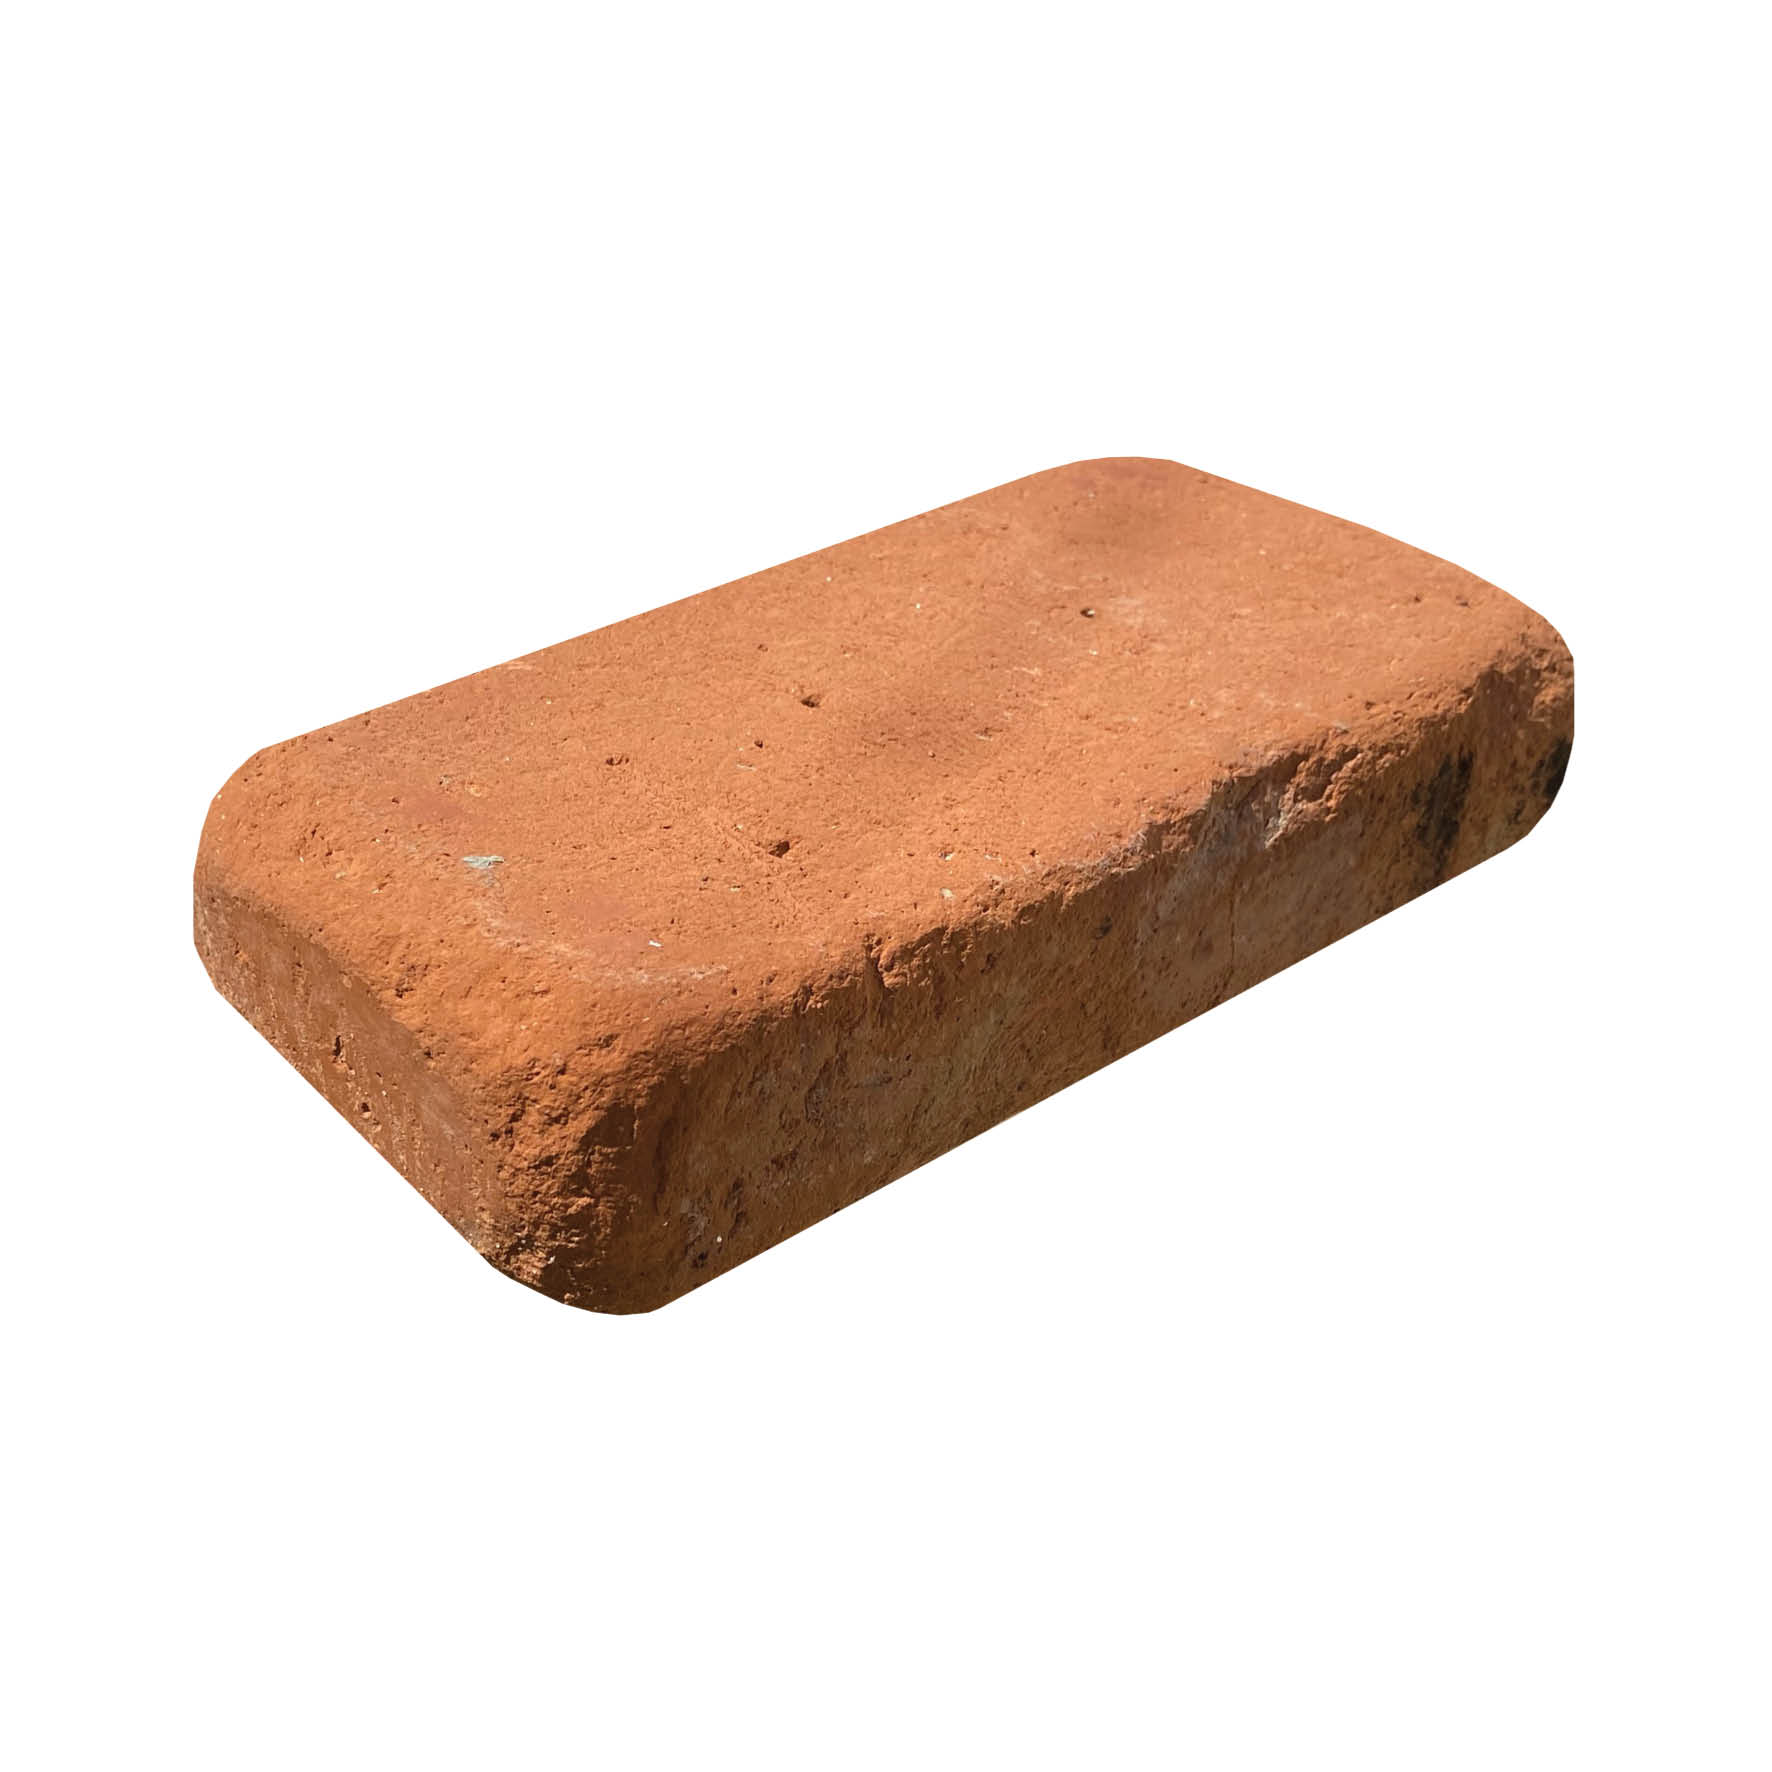 Tumbled Old Red Brick Paver | 240 x 110 Paver